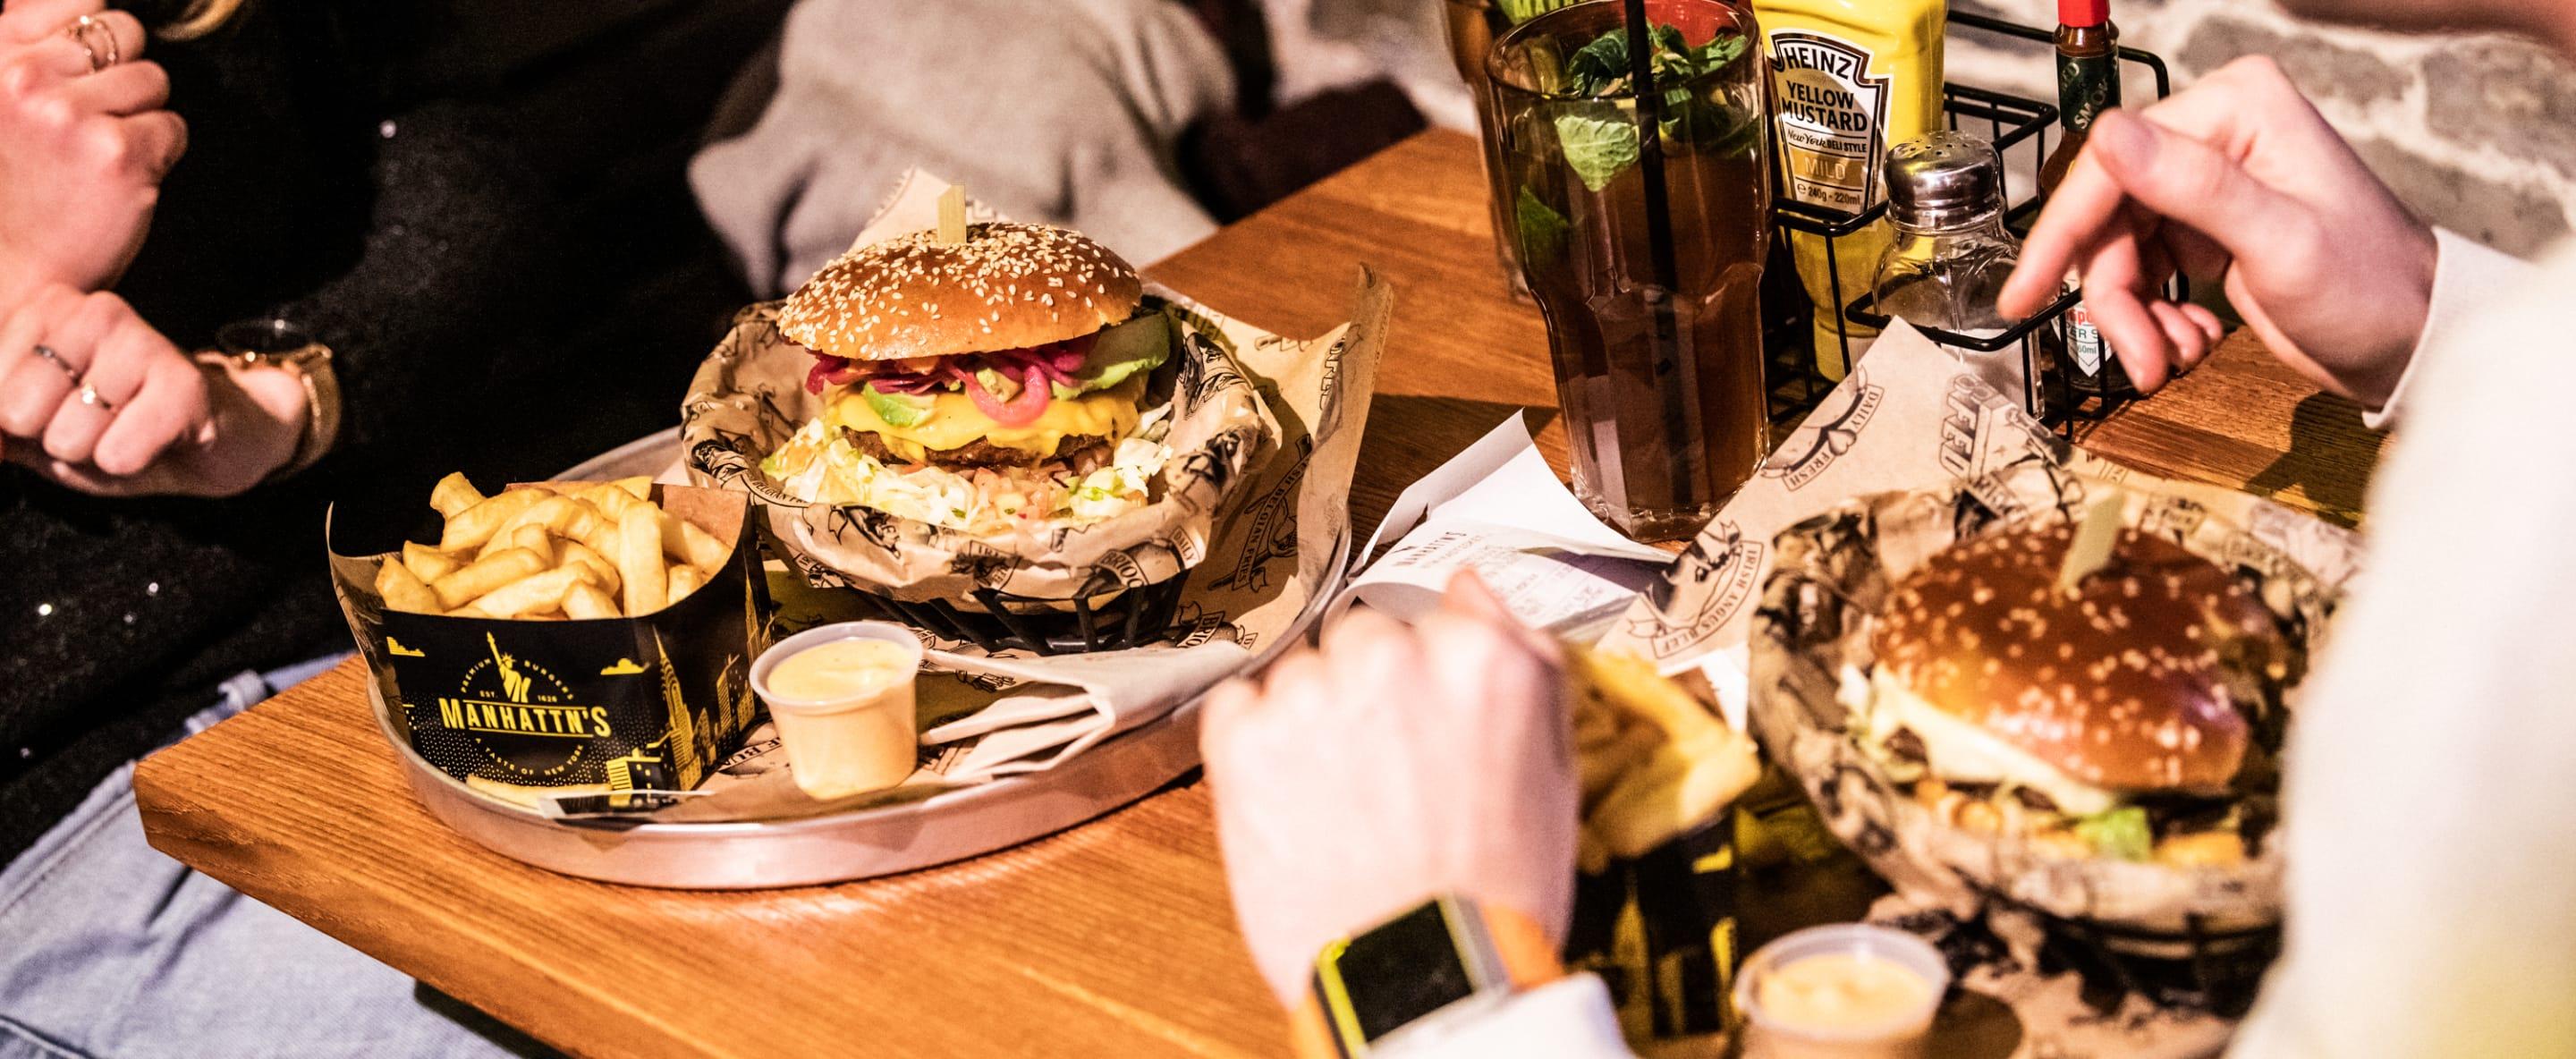 Discover the Manhattn's burgers